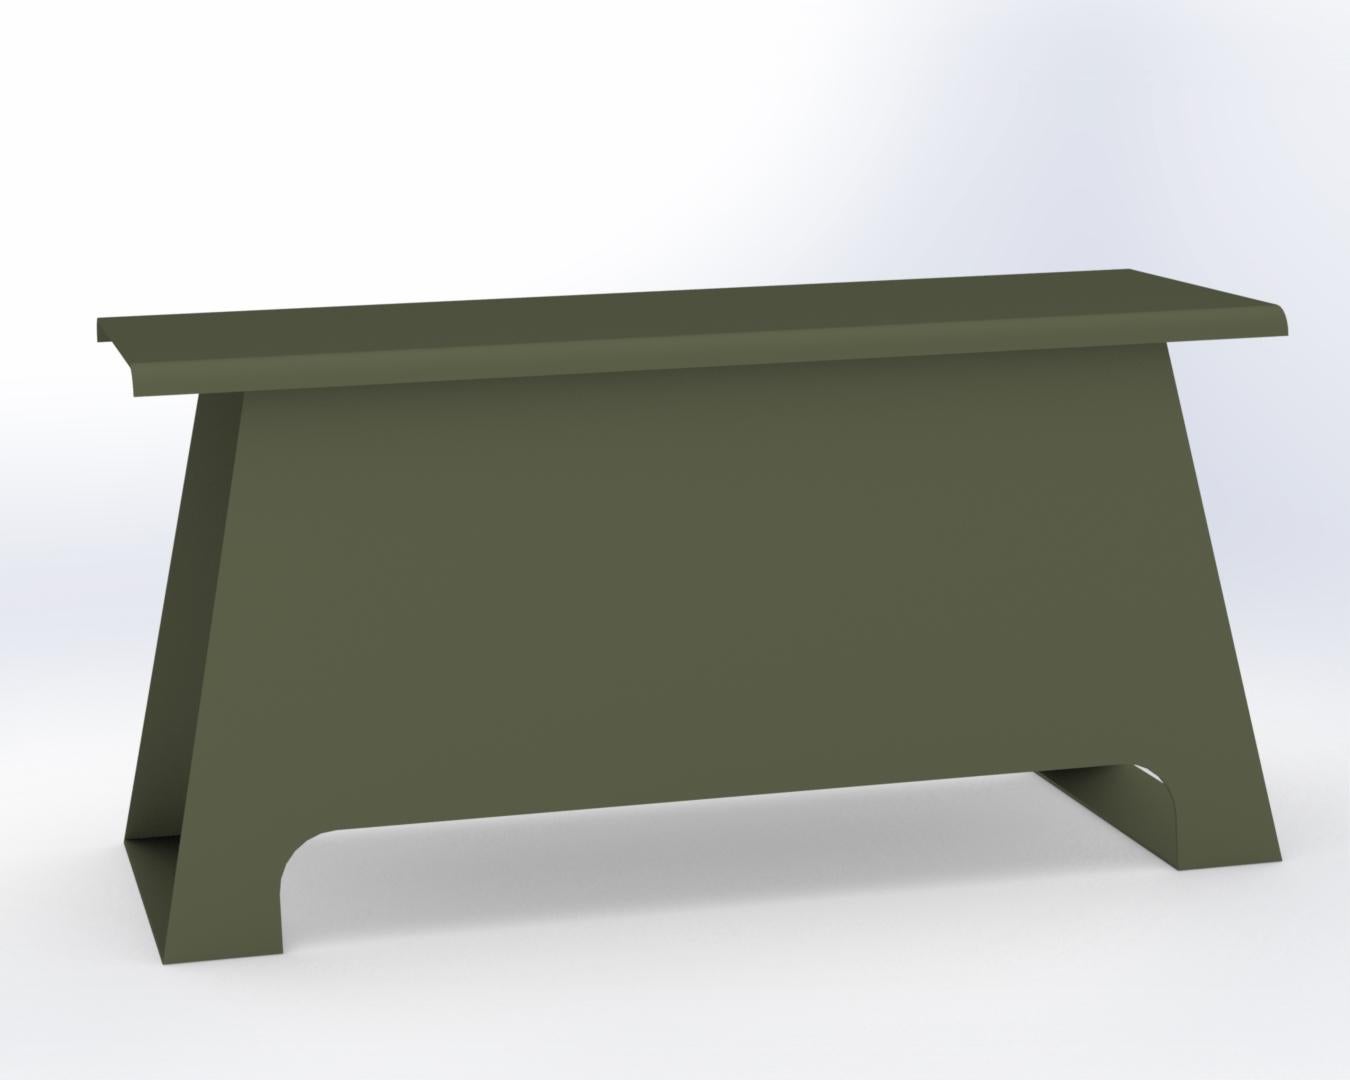 The old school 100 green bench by Harm De Veer
Dimensions: D 100 x W 40 x H 50 cm
Materials: Steel - thermolytic galvanizing - Powdercoating - Coating
Weight: 42 kg
Also available in various colors and sizes.

The Old school is based on the